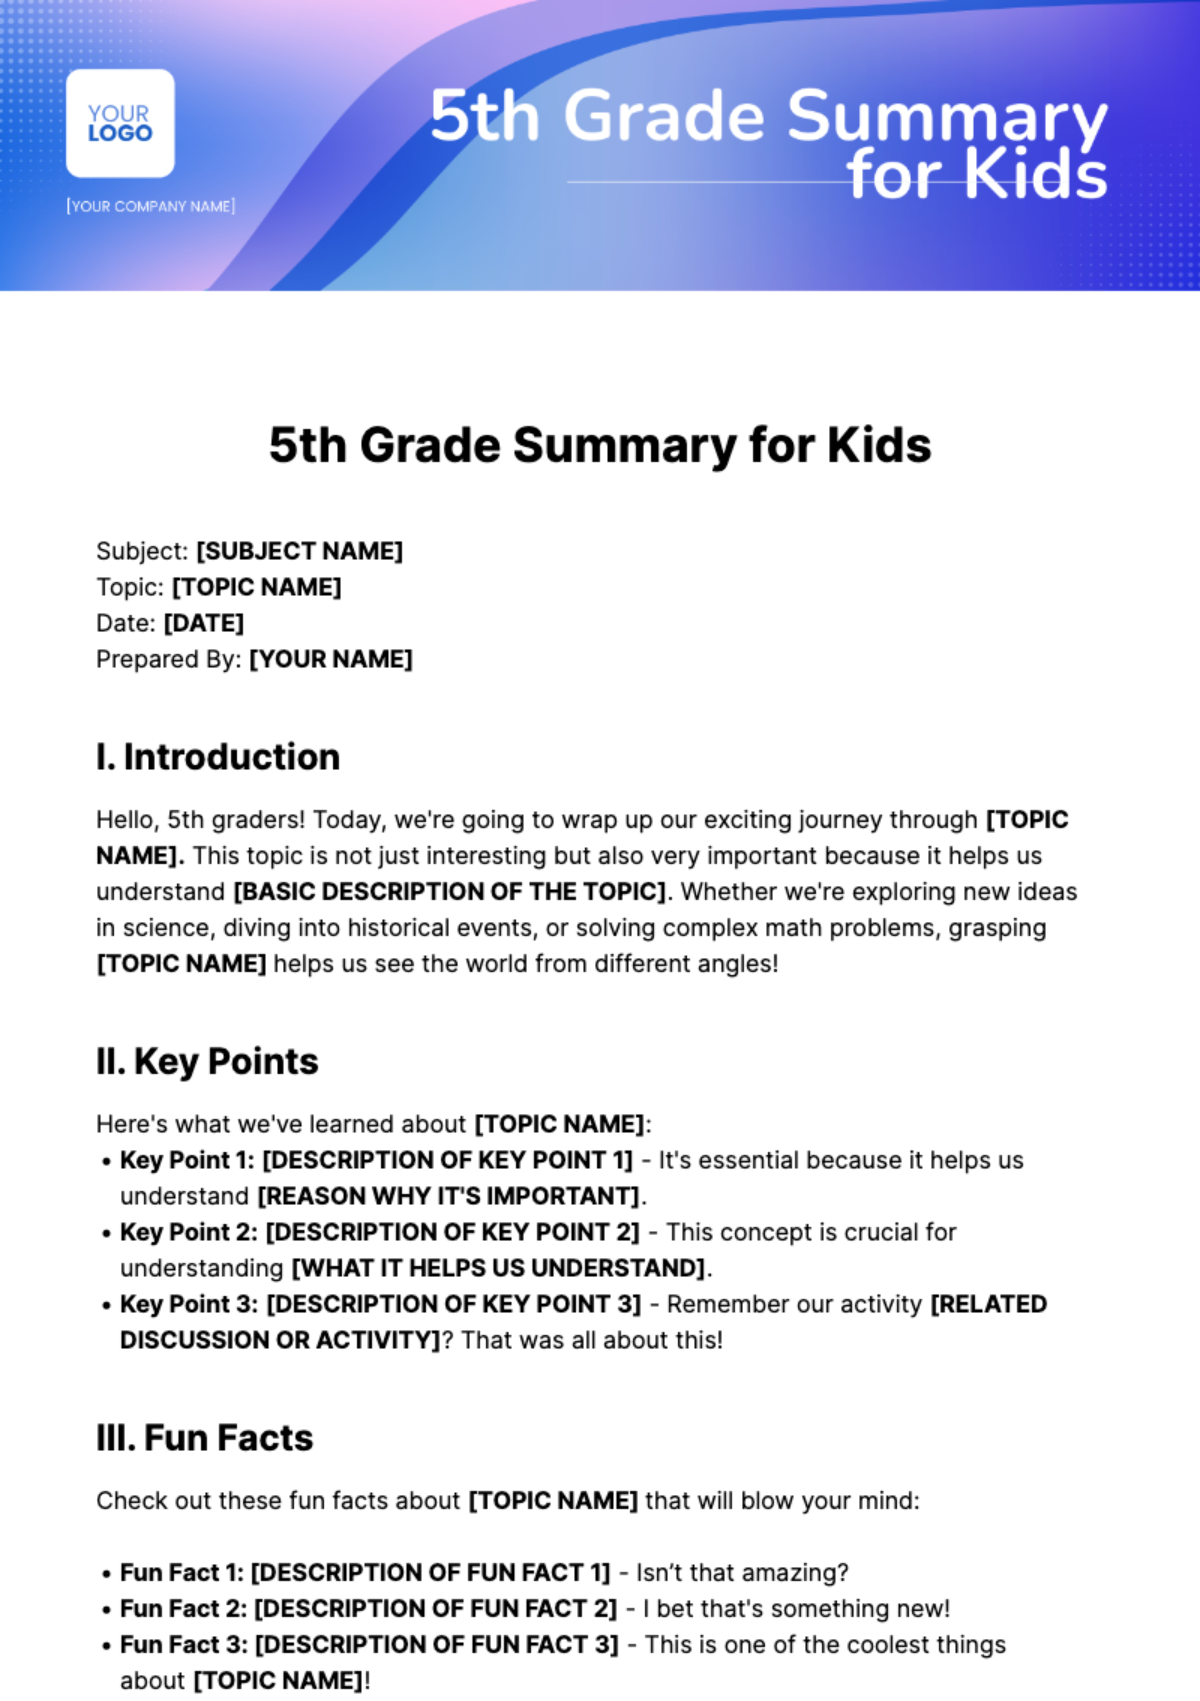 5th Grade Summary for Kids Template